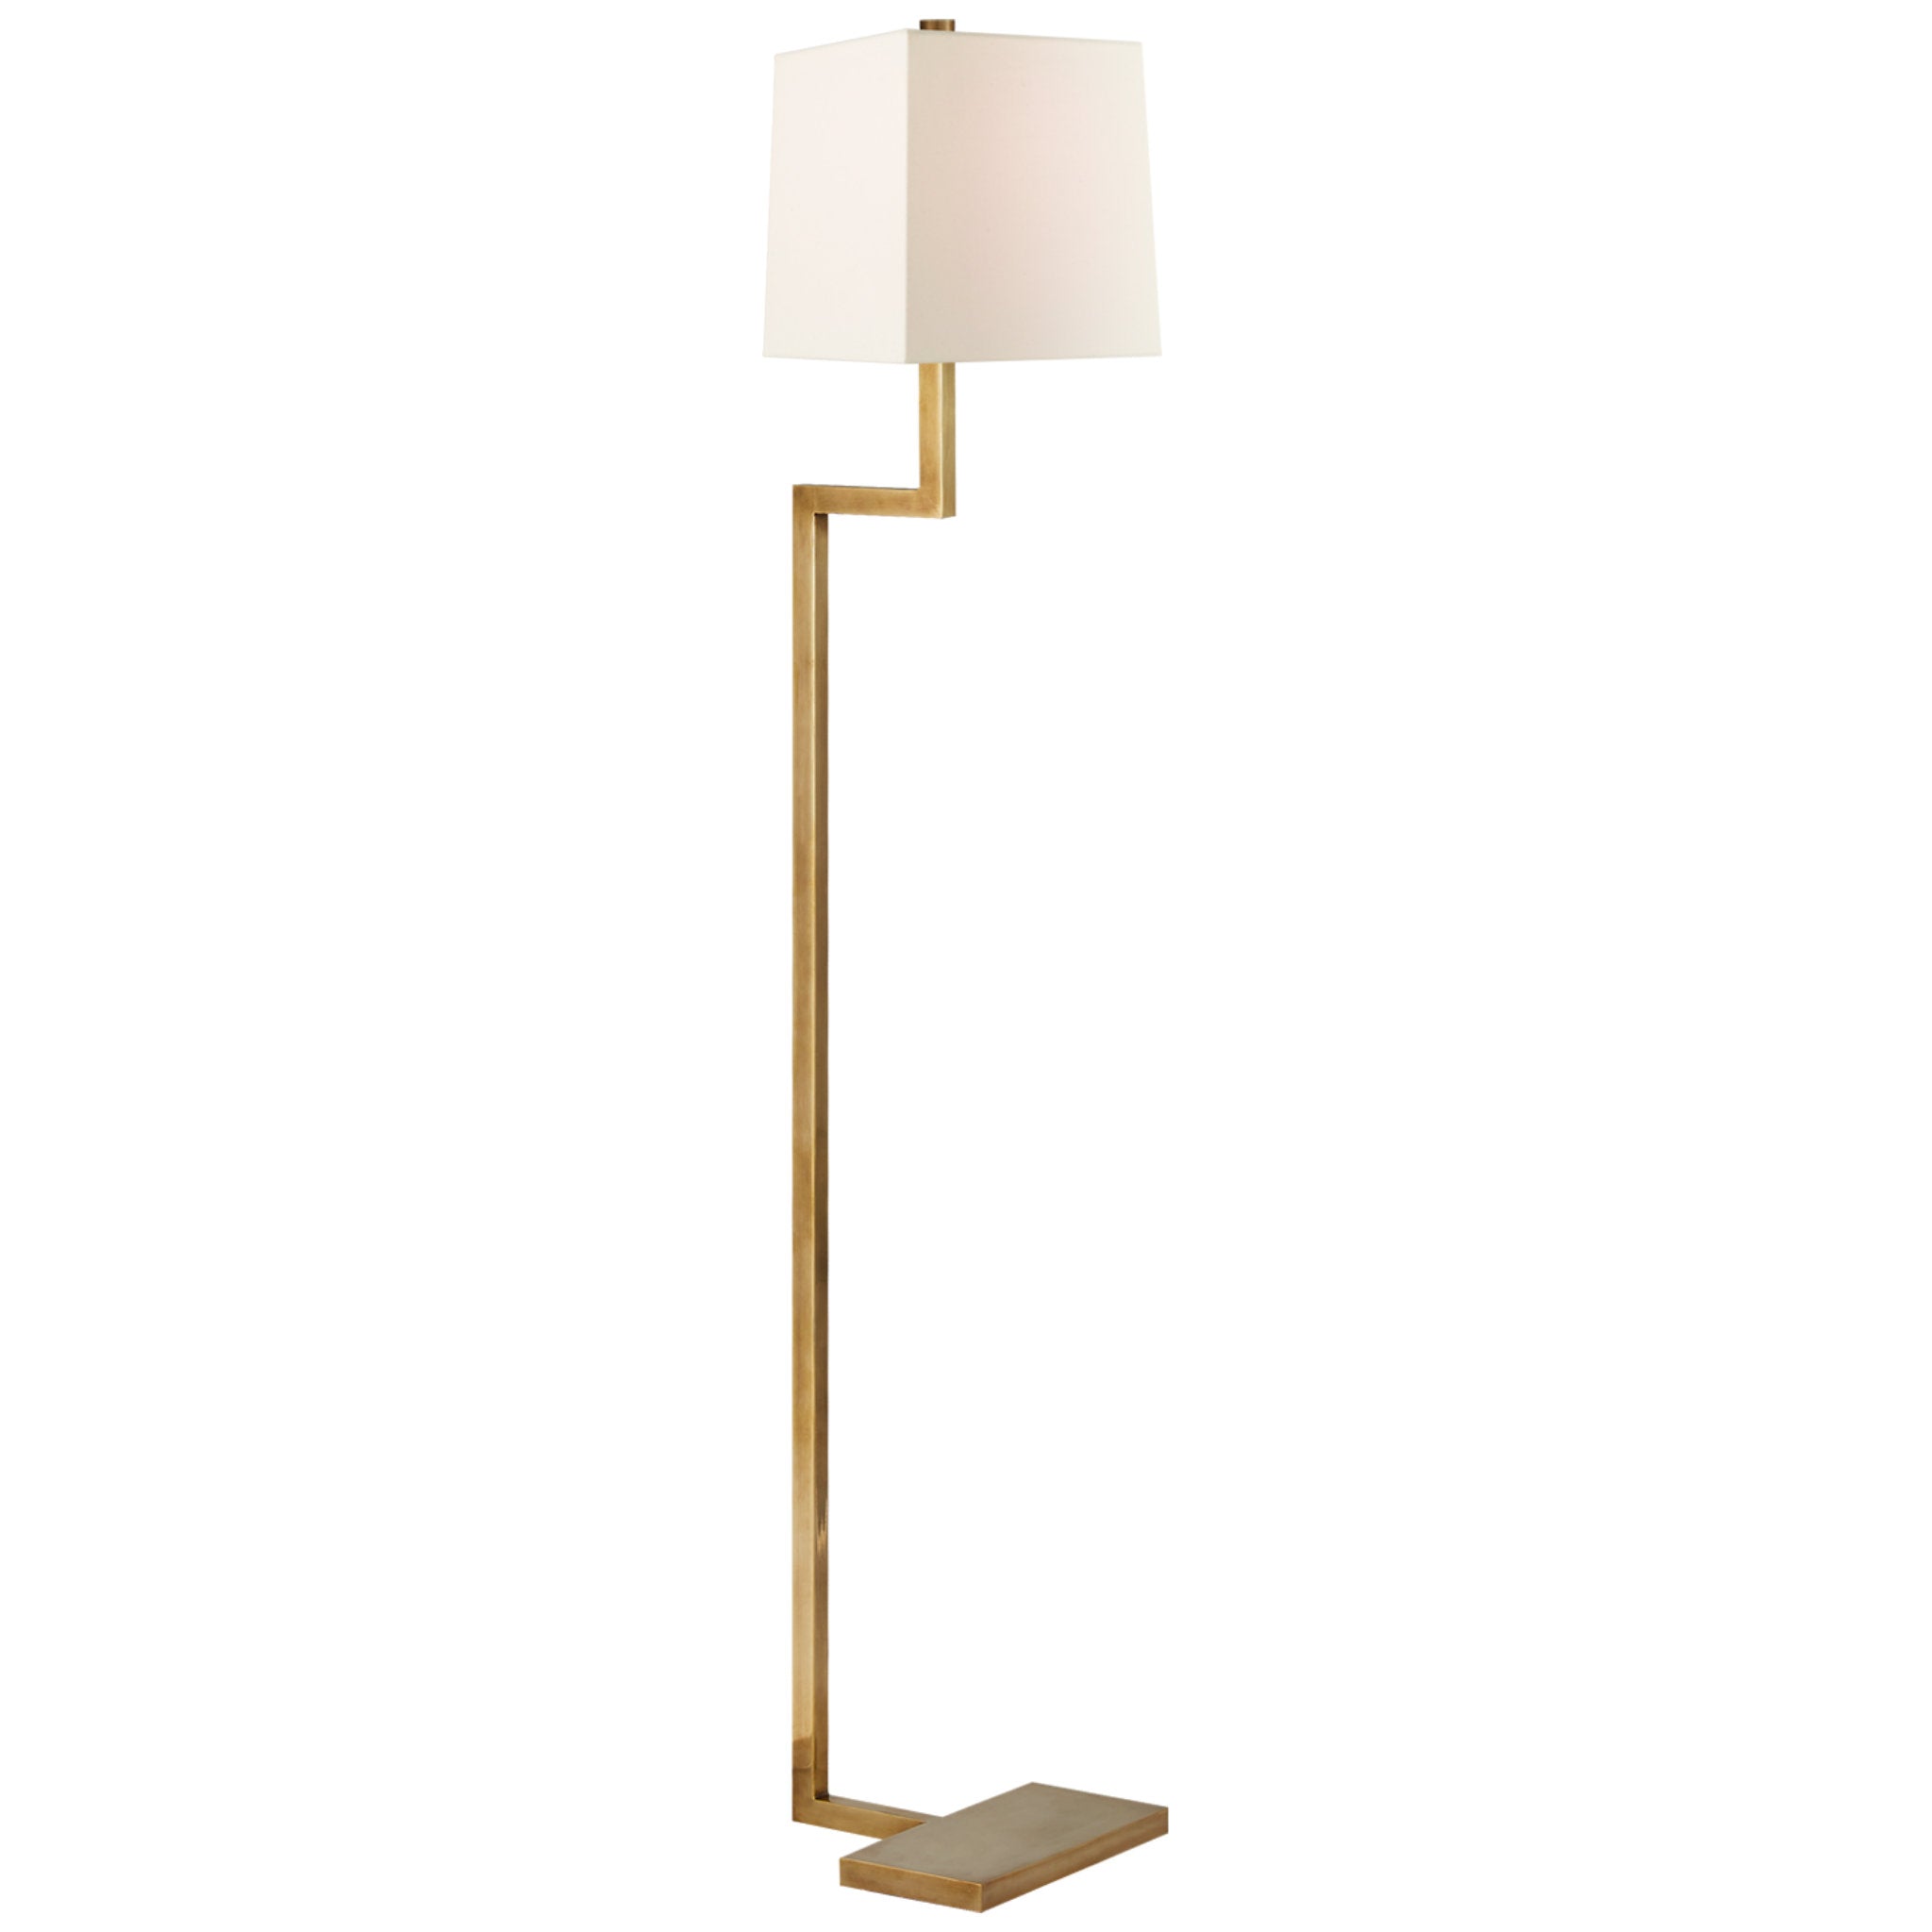 AERIN Alander Floor Lamp in Hand-Rubbed Antique Brass with Linen Shade